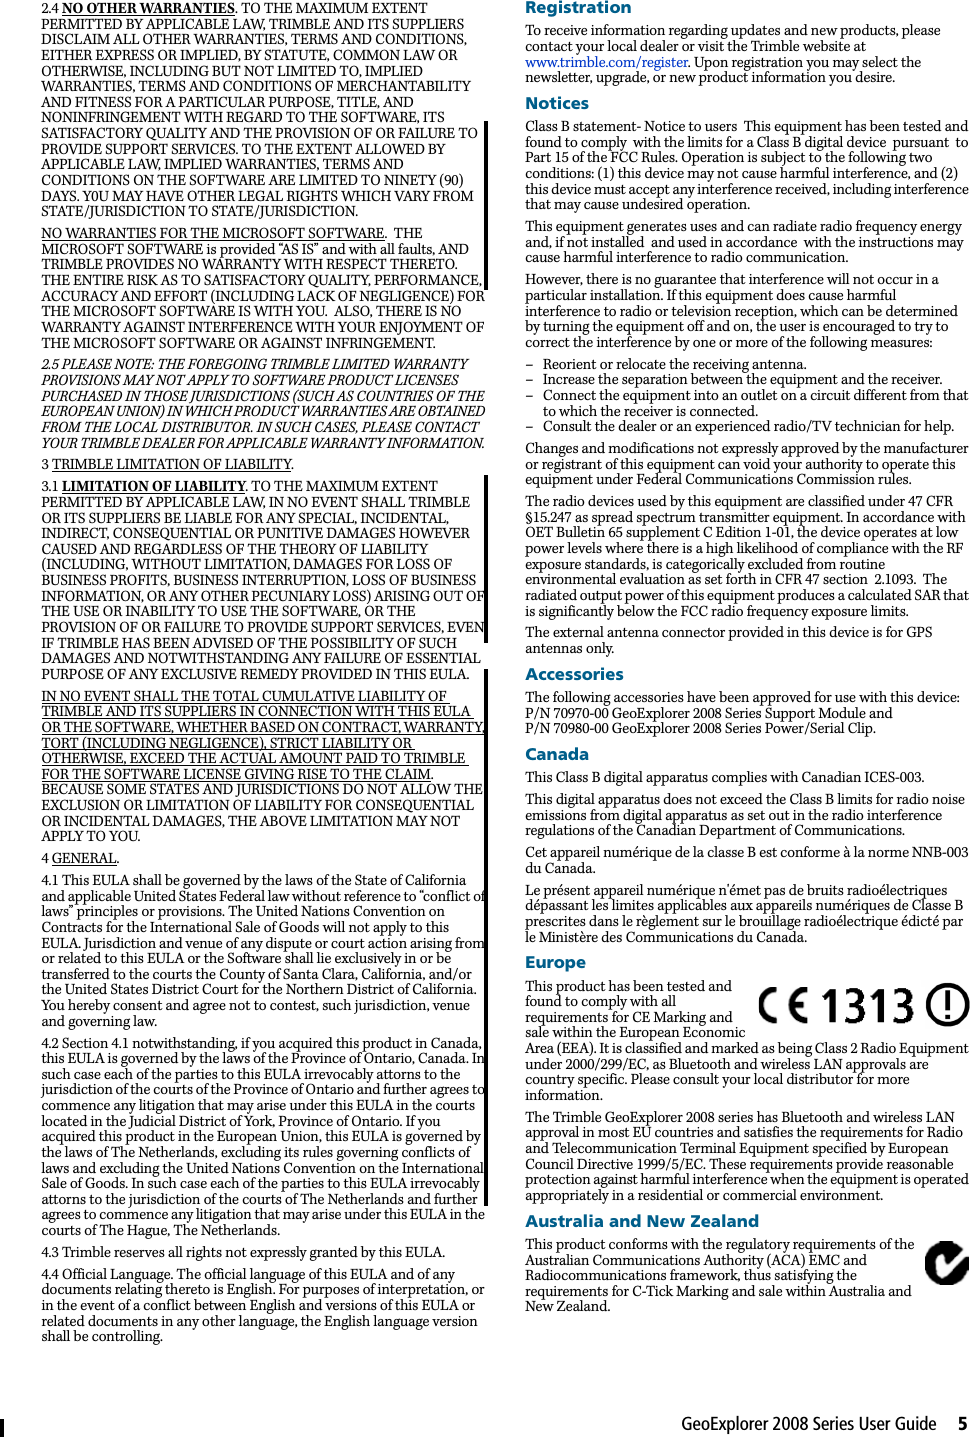 GeoExplorer 2008 Series User Guide     52.4 NO OTHER WARRANTIES. TO THE MAXIMUM EXTENT PERMITTED BY APPLICABLE LAW, TRIMBLE AND ITS SUPPLIERS DISCLAIM ALL OTHER WARRANTIES, TERMS AND CONDITIONS, EITHER EXPRESS OR IMPLIED, BY STATUTE, COMMON LAW OR OTHERWISE, INCLUDING BUT NOT LIMITED TO, IMPLIED WARRANTIES, TERMS AND CONDITIONS OF MERCHANTABILITY AND FITNESS FOR A PARTICULAR PURPOSE, TITLE, AND NONINFRINGEMENT WITH REGARD TO THE SOFTWARE, ITS SATISFACTORY QUALITY AND THE PROVISION OF OR FAILURE TO PROVIDE SUPPORT SERVICES. TO THE EXTENT ALLOWED BY APPLICABLE LAW, IMPLIED WARRANTIES, TERMS AND CONDITIONS ON THE SOFTWARE ARE LIMITED TO NINETY (90) DAYS. Y0U MAY HAVE OTHER LEGAL RIGHTS WHICH VARY FROM STATE/JURISDICTION TO STATE/JURISDICTION. NO WARRANTIES FOR THE MICROSOFT SOFTWARE.  THE MICROSOFT SOFTWARE is provided “AS IS” and with all faults, AND TRIMBLE PROVIDES NO WARRANTY WITH RESPECT THERETO.  THE ENTIRE RISK AS TO SATISFACTORY QUALITY, PERFORMANCE, ACCURACY AND EFFORT (INCLUDING LACK OF NEGLIGENCE) FOR THE MICROSOFT SOFTWARE IS WITH YOU.  ALSO, THERE IS NO WARRANTY AGAINST INTERFERENCE WITH YOUR ENJOYMENT OF THE MICROSOFT SOFTWARE OR AGAINST INFRINGEMENT.  2.5 PLEASE NOTE: THE FOREGOING TRIMBLE LIMITED WARRANTY PROVISIONS MAY NOT APPLY TO SOFTWARE PRODUCT LICENSES PURCHASED IN THOSE JURISDICTIONS (SUCH AS COUNTRIES OF THE EUROPEAN UNION) IN WHICH PRODUCT WARRANTIES ARE OBTAINED FROM THE LOCAL DISTRIBUTOR. IN SUCH CASES, PLEASE CONTACT YOUR TRIMBLE DEALER FOR APPLICABLE WARRANTY INFORMATION. 3 TRIMBLE LIMITATION OF LIABILITY. 3.1 LIMITATION OF LIABILITY. TO THE MAXIMUM EXTENT PERMITTED BY APPLICABLE LAW, IN NO EVENT SHALL TRIMBLE OR ITS SUPPLIERS BE LIABLE FOR ANY SPECIAL, INCIDENTAL, INDIRECT, CONSEQUENTIAL OR PUNITIVE DAMAGES HOWEVER CAUSED AND REGARDLESS OF THE THEORY OF LIABILITY (INCLUDING, WITHOUT LIMITATION, DAMAGES FOR LOSS OF BUSINESS PROFITS, BUSINESS INTERRUPTION, LOSS OF BUSINESS INFORMATION, OR ANY OTHER PECUNIARY LOSS) ARISING OUT OF THE USE OR INABILITY TO USE THE SOFTWARE, OR THE PROVISION OF OR FAILURE TO PROVIDE SUPPORT SERVICES, EVEN IF TRIMBLE HAS BEEN ADVISED OF THE POSSIBILITY OF SUCH DAMAGES AND NOTWITHSTANDING ANY FAILURE OF ESSENTIAL PURPOSE OF ANY EXCLUSIVE REMEDY PROVIDED IN THIS EULA. IN NO EVENT SHALL THE TOTAL CUMULATIVE LIABILITY OF TRIMBLE AND ITS SUPPLIERS IN CONNECTION WITH THIS EULA OR THE SOFTWARE, WHETHER BASED ON CONTRACT, WARRANTY, TORT (INCLUDING NEGLIGENCE), STRICT LIABILITY OR OTHERWISE, EXCEED THE ACTUAL AMOUNT PAID TO TRIMBLE FOR THE SOFTWARE LICENSE GIVING RISE TO THE CLAIM. BECAUSE SOME STATES AND JURISDICTIONS DO NOT ALLOW THE EXCLUSION OR LIMITATION OF LIABILITY FOR CONSEQUENTIAL OR INCIDENTAL DAMAGES, THE ABOVE LIMITATION MAY NOT APPLY TO YOU. 4 GENERAL. 4.1 This EULA shall be governed by the laws of the State of California and applicable United States Federal law without reference to “conflict of laws” principles or provisions. The United Nations Convention on Contracts for the International Sale of Goods will not apply to this EULA. Jurisdiction and venue of any dispute or court action arising from or related to this EULA or the Software shall lie exclusively in or be transferred to the courts the County of Santa Clara, California, and/or the United States District Court for the Northern District of California. You hereby consent and agree not to contest, such jurisdiction, venue and governing law. 4.2 Section 4.1 notwithstanding, if you acquired this product in Canada, this EULA is governed by the laws of the Province of Ontario, Canada. In such case each of the parties to this EULA irrevocably attorns to the jurisdiction of the courts of the Province of Ontario and further agrees to commence any litigation that may arise under this EULA in the courts located in the Judicial District of York, Province of Ontario. If you acquired this product in the European Union, this EULA is governed by the laws of The Netherlands, excluding its rules governing conflicts of laws and excluding the United Nations Convention on the International Sale of Goods. In such case each of the parties to this EULA irrevocably attorns to the jurisdiction of the courts of The Netherlands and further agrees to commence any litigation that may arise under this EULA in the courts of The Hague, The Netherlands. 4.3 Trimble reserves all rights not expressly granted by this EULA. 4.4 Official Language. The official language of this EULA and of any documents relating thereto is English. For purposes of interpretation, or in the event of a conflict between English and versions of this EULA or related documents in any other language, the English language version shall be controlling.RegistrationTo receive information regarding updates and new products, please contact your local dealer or visit the Trimble website at www.trimble.com/register. Upon registration you may select the newsletter, upgrade, or new product information you desire. NoticesClass B statement- Notice to users  This equipment has been tested and found to comply  with the limits for a Class B digital device  pursuant  to Part 15 of the FCC Rules. Operation is subject to the following two conditions: (1) this device may not cause harmful interference, and (2) this device must accept any interference received, including interference that may cause undesired operation.This equipment generates uses and can radiate radio frequency energy and, if not installed  and used in accordance  with the instructions may cause harmful interference to radio communication. However, there is no guarantee that interference will not occur in a particular installation. If this equipment does cause harmful interference to radio or television reception, which can be determined by turning the equipment off and on, the user is encouraged to try to correct the interference by one or more of the following measures:– Reorient or relocate the receiving antenna.– Increase the separation between the equipment and the receiver.– Connect the equipment into an outlet on a circuit different from that to which the receiver is connected.– Consult the dealer or an experienced radio/TV technician for help.Changes and modifications not expressly approved by the manufacturer or registrant of this equipment can void your authority to operate this equipment under Federal Communications Commission rules.The radio devices used by this equipment are classified under 47 CFR §15.247 as spread spectrum transmitter equipment. In accordance with OET Bulletin 65 supplement C Edition 1-01, the device operates at low power levels where there is a high likelihood of compliance with the RF exposure standards, is categorically excluded from routine environmental evaluation as set forth in CFR 47 section  2.1093.  The radiated output power of this equipment produces a calculated SAR that is significantly below the FCC radio frequency exposure limits. The external antenna connector provided in this device is for GPS antennas only.AccessoriesThe following accessories have been approved for use with this device: P/N 70970-00 GeoExplorer 2008 Series Support Module and P/N 70980-00 GeoExplorer 2008 Series Power/Serial Clip. CanadaThis Class B digital apparatus complies with Canadian ICES-003.This digital apparatus does not exceed the Class B limits for radio noise emissions from digital apparatus as set out in the radio interference regulations of the Canadian Department of Communications.Cet appareil numérique de la classe B est conforme à la norme NNB-003 du Canada.Le présent appareil numérique n&apos;émet pas de bruits radioélectriques dépassant les limites applicables aux appareils numériques de Classe B prescrites dans le règlement sur le brouillage radioélectrique édicté par le Ministère des Communications du Canada.EuropeThis product has been tested and found to comply with all requirements for CE Marking and sale within the European Economic Area (EEA). It is classified and marked as being Class 2 Radio Equipment under 2000/299/EC, as Bluetooth and wireless LAN approvals are country specific. Please consult your local distributor for more information.The Trimble GeoExplorer 2008 series has Bluetooth and wireless LAN approval in most EU countries and satisfies the requirements for Radio and Telecommunication Terminal Equipment specified by European Council Directive 1999/5/EC. These requirements provide reasonable protection against harmful interference when the equipment is operated appropriately in a residential or commercial environment.  Australia and New ZealandThis product conforms with the regulatory requirements of the Australian Communications Authority (ACA) EMC and Radiocommunications framework, thus satisfying the requirements for C-Tick Marking and sale within Australia and New Zealand. 